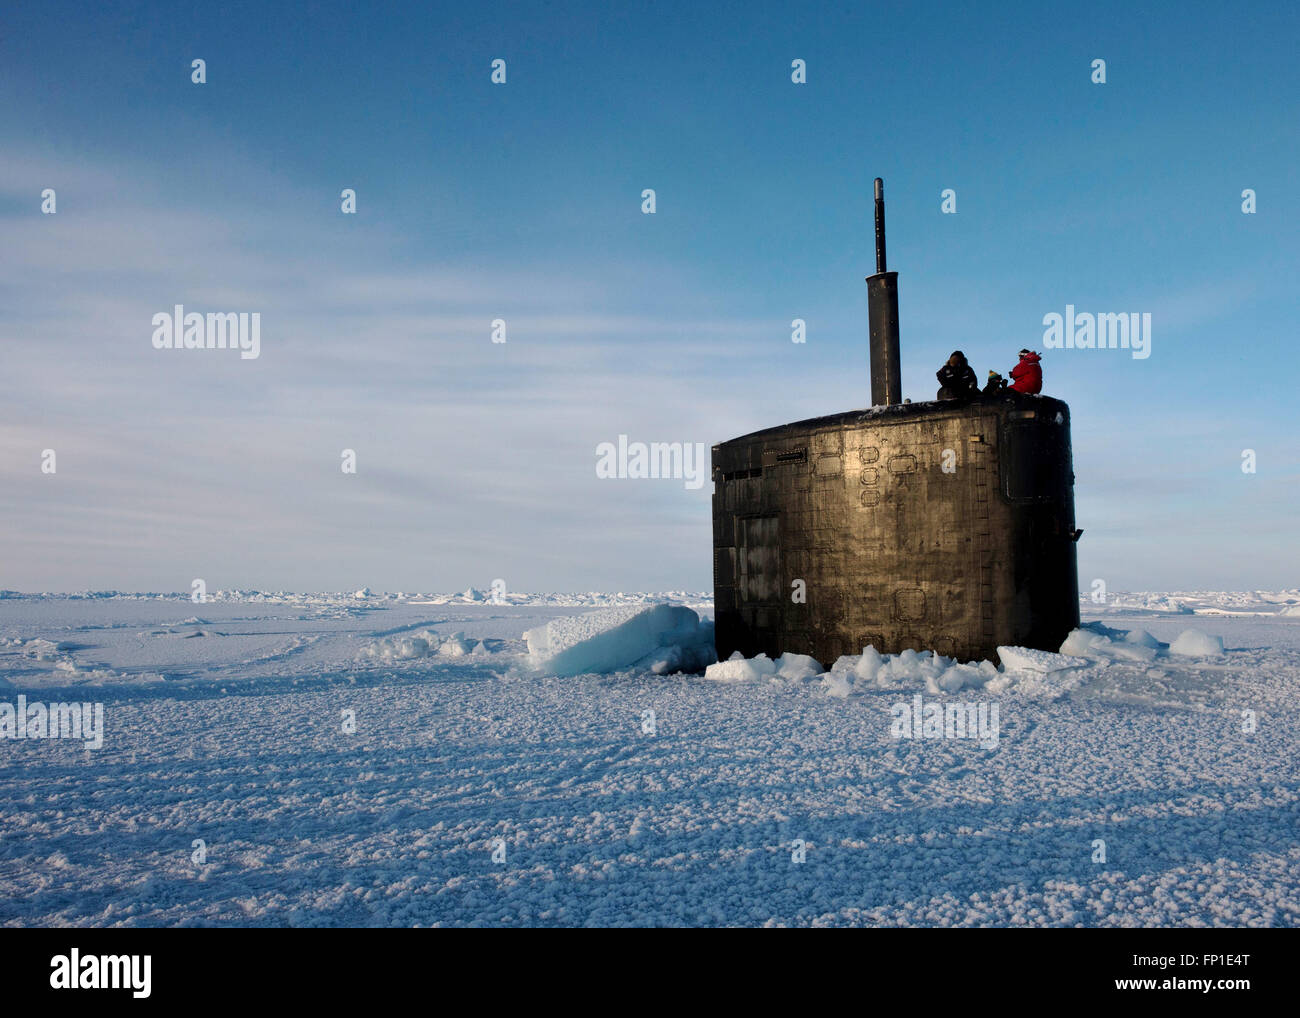 U.S Navy Virginia-class nuclear attack submarine USS Hampton surfaces through the arctic ice during training exercise ICEX 2016 March 14, 2016 in the Arctic Circle. Stock Photo